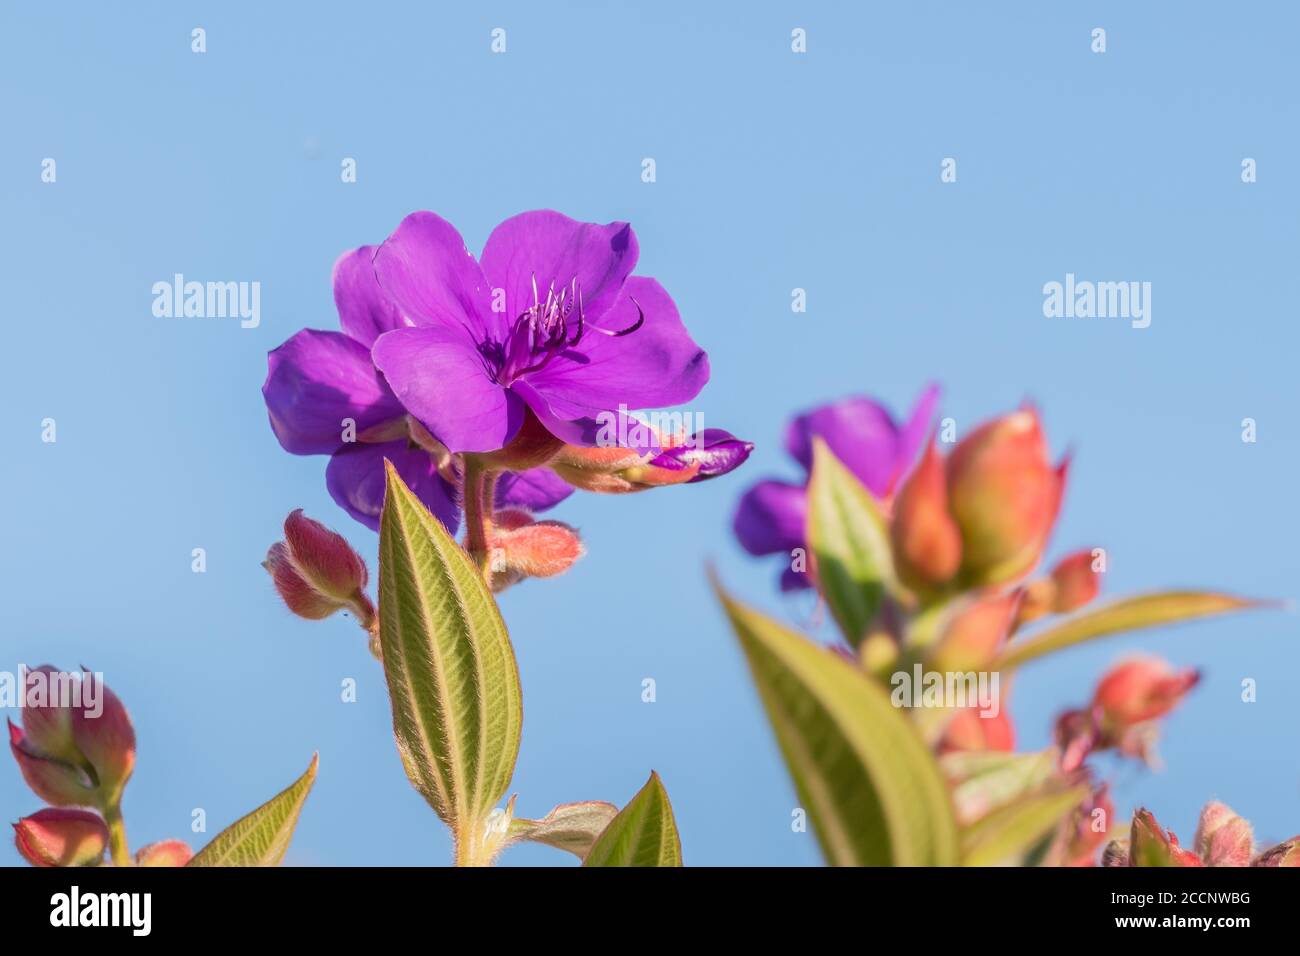 purple flowers from plant glory bush with sunlight Stock Photo